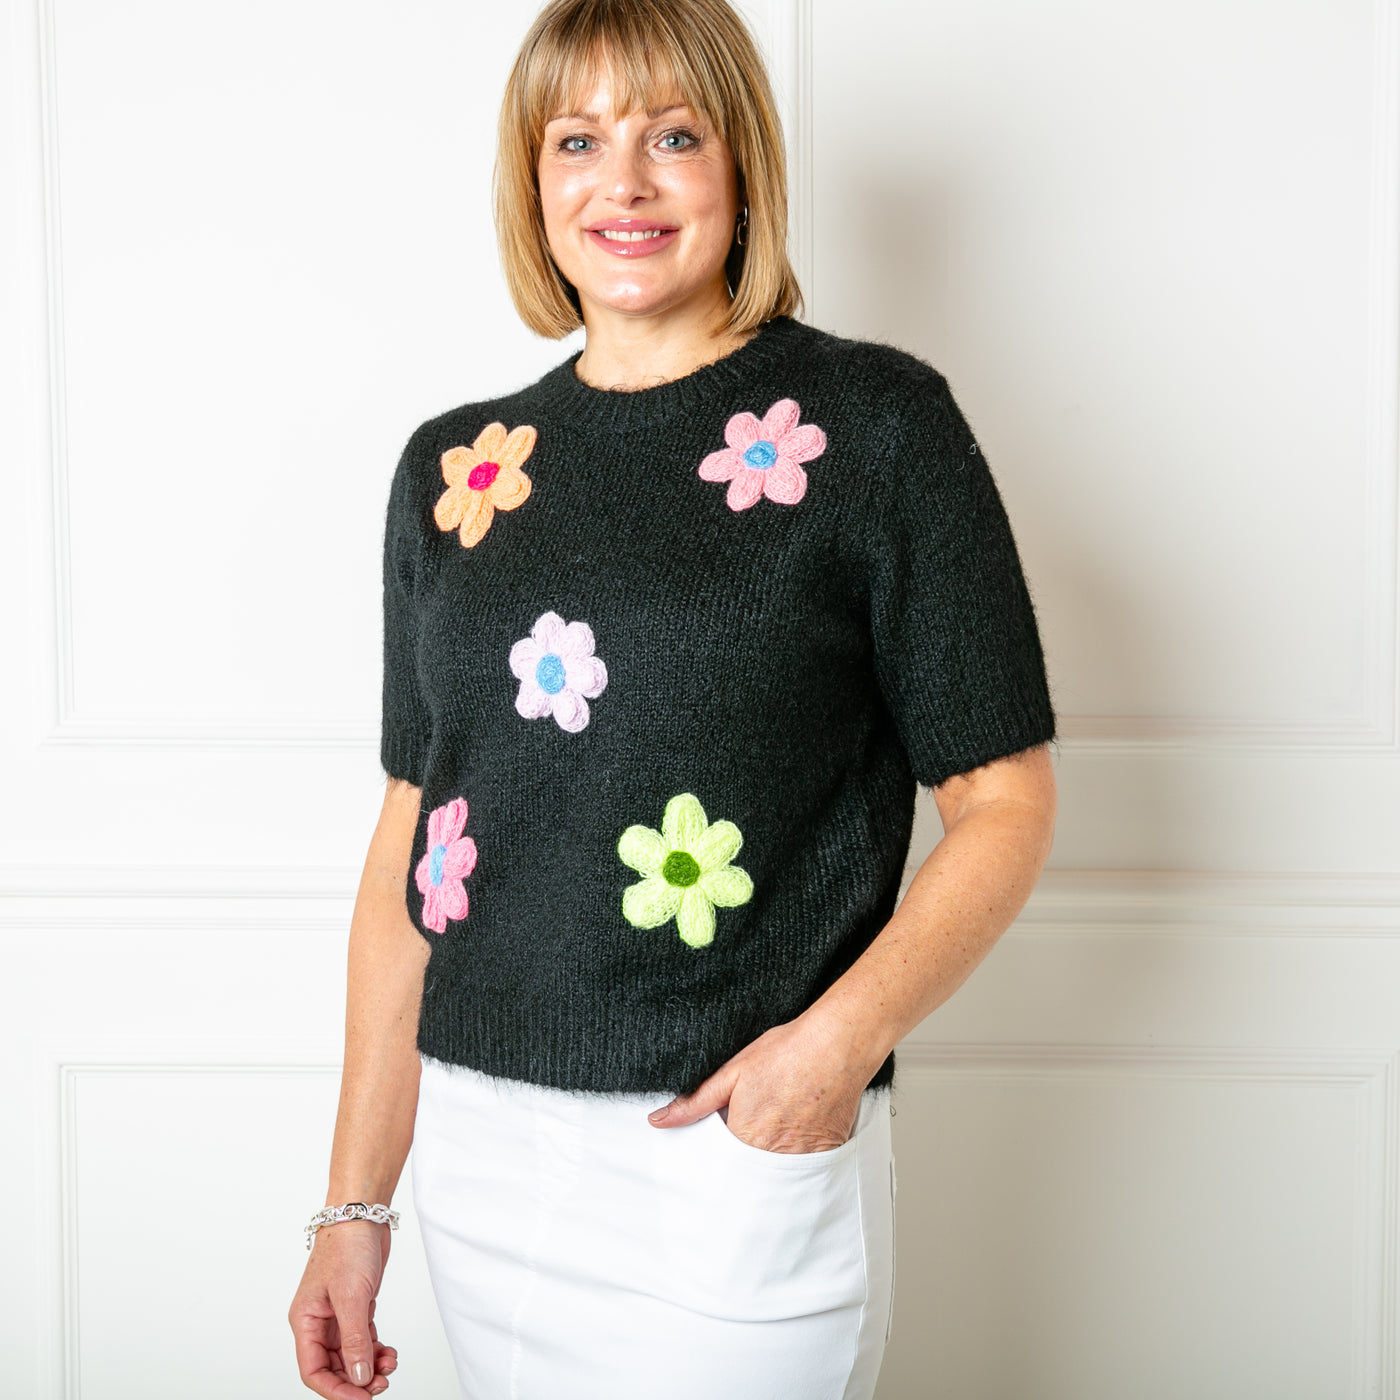 The black Short Sleeve Daisy Jumper made from a blend of cotton and acrylic and perfect for spring